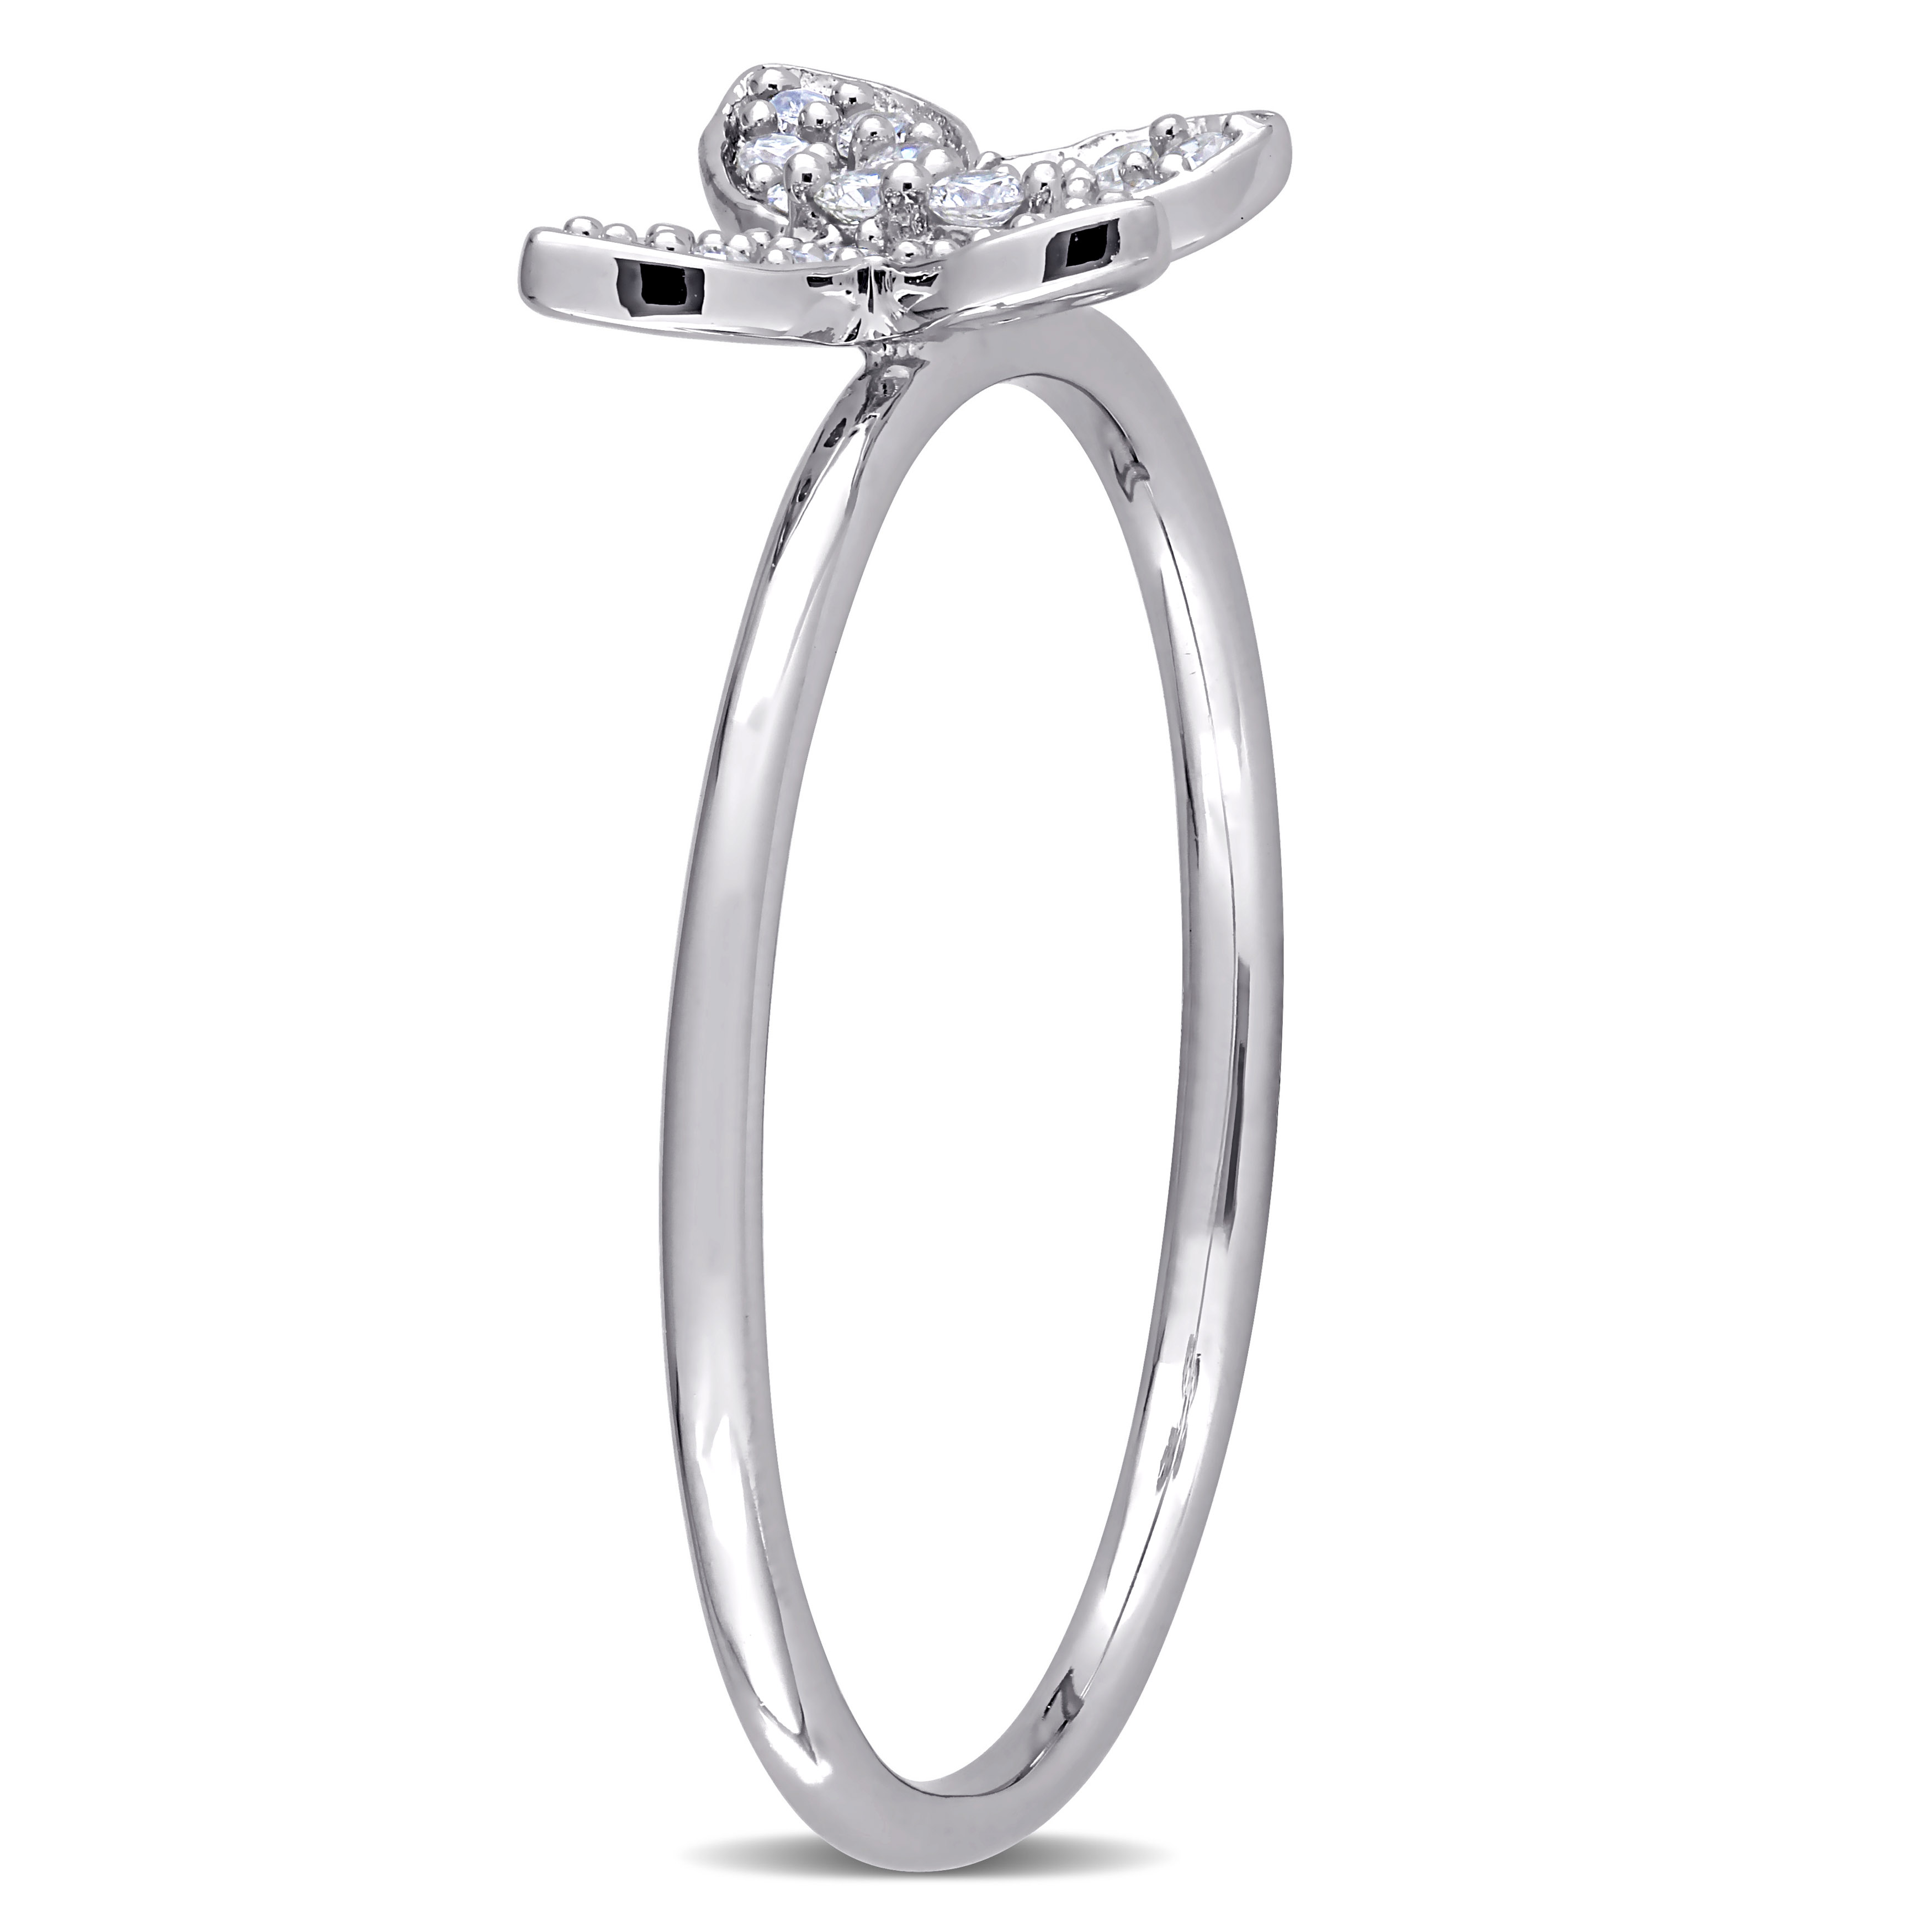 1/8 CT TW Diamond Butterfly Ring in 10k White Gold